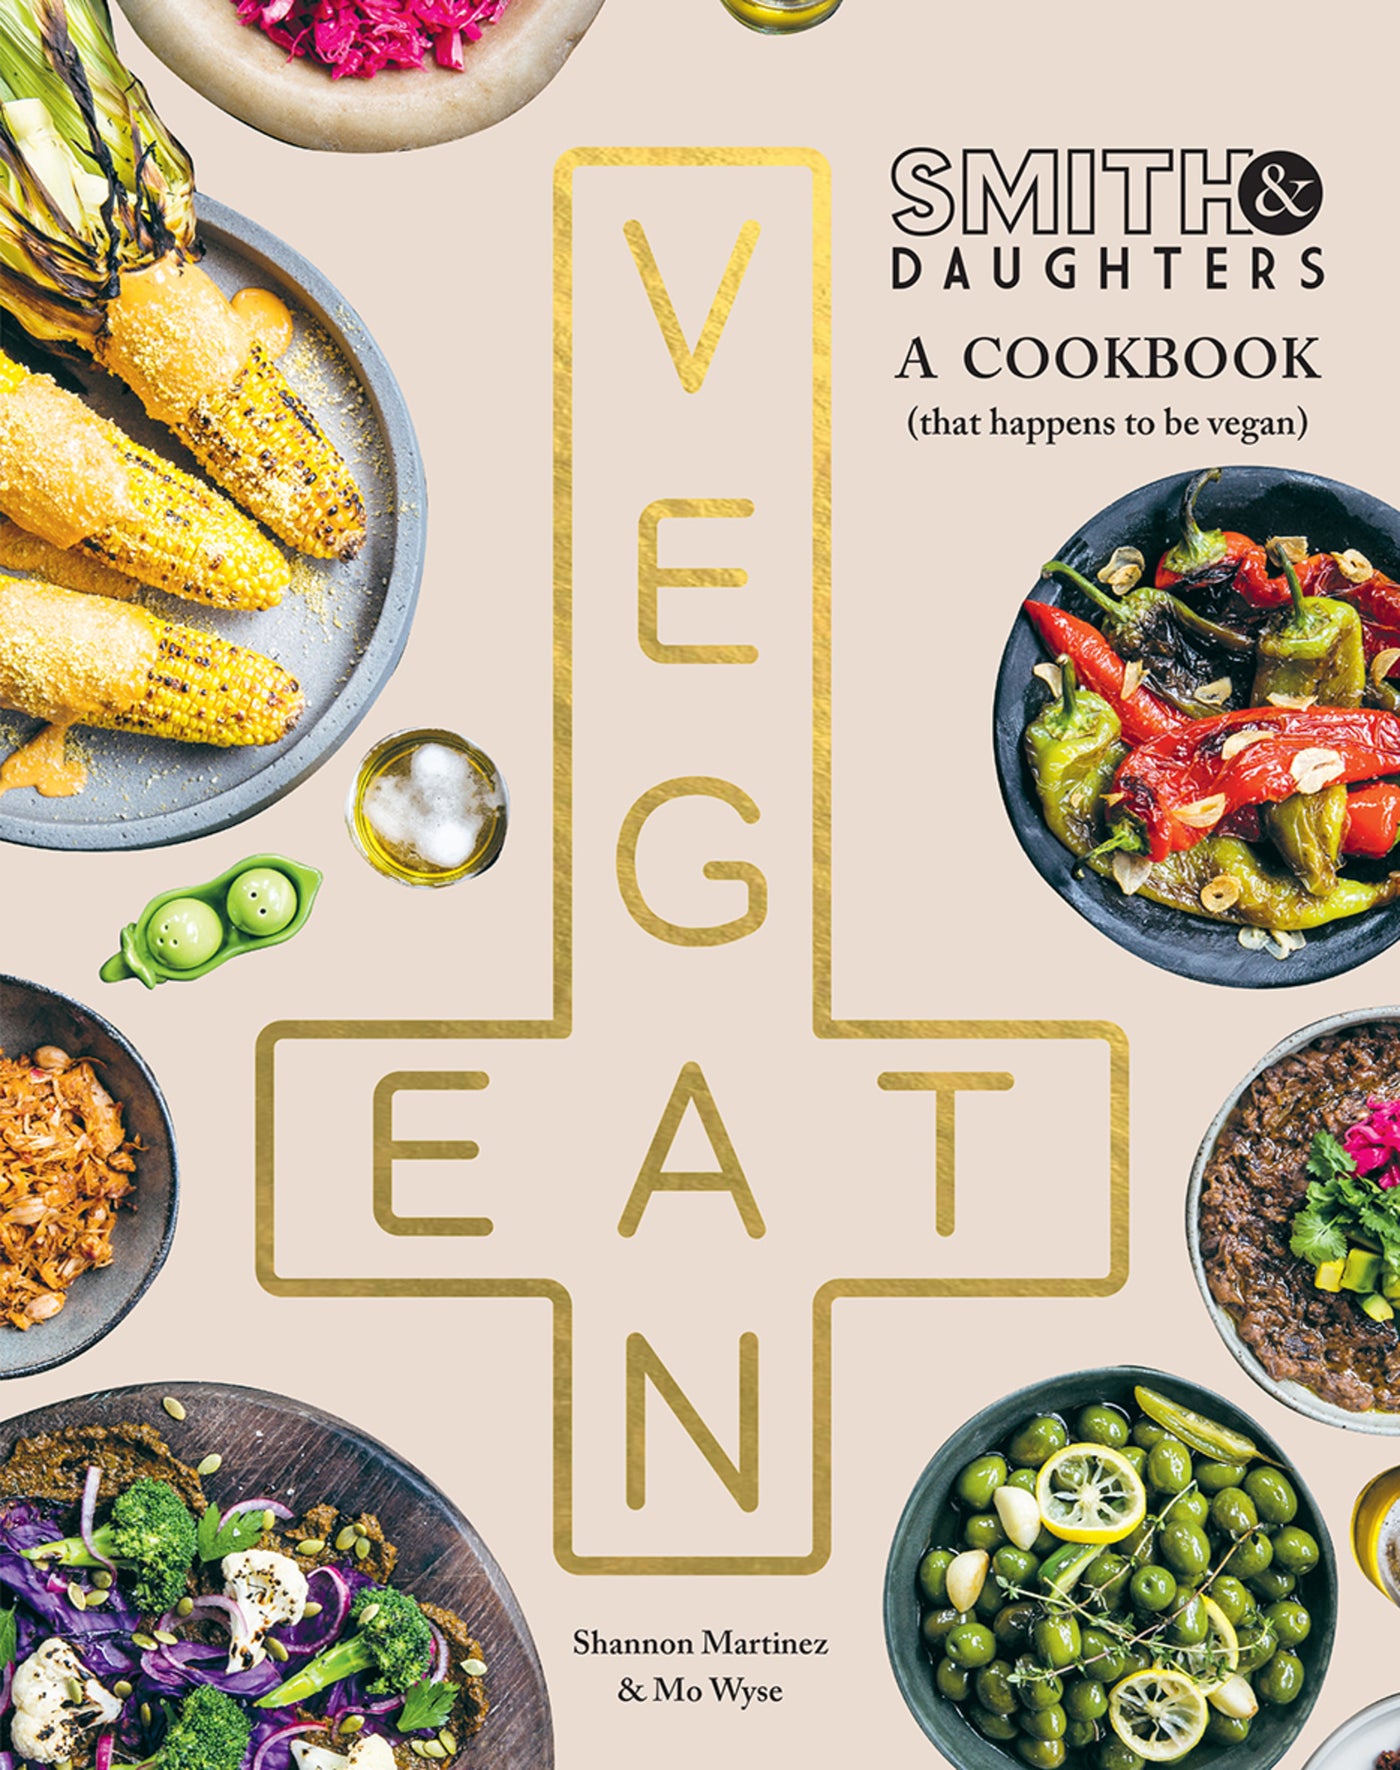 Smith &amp; Daughters: A Cookbook (That Happens to be Vegan)